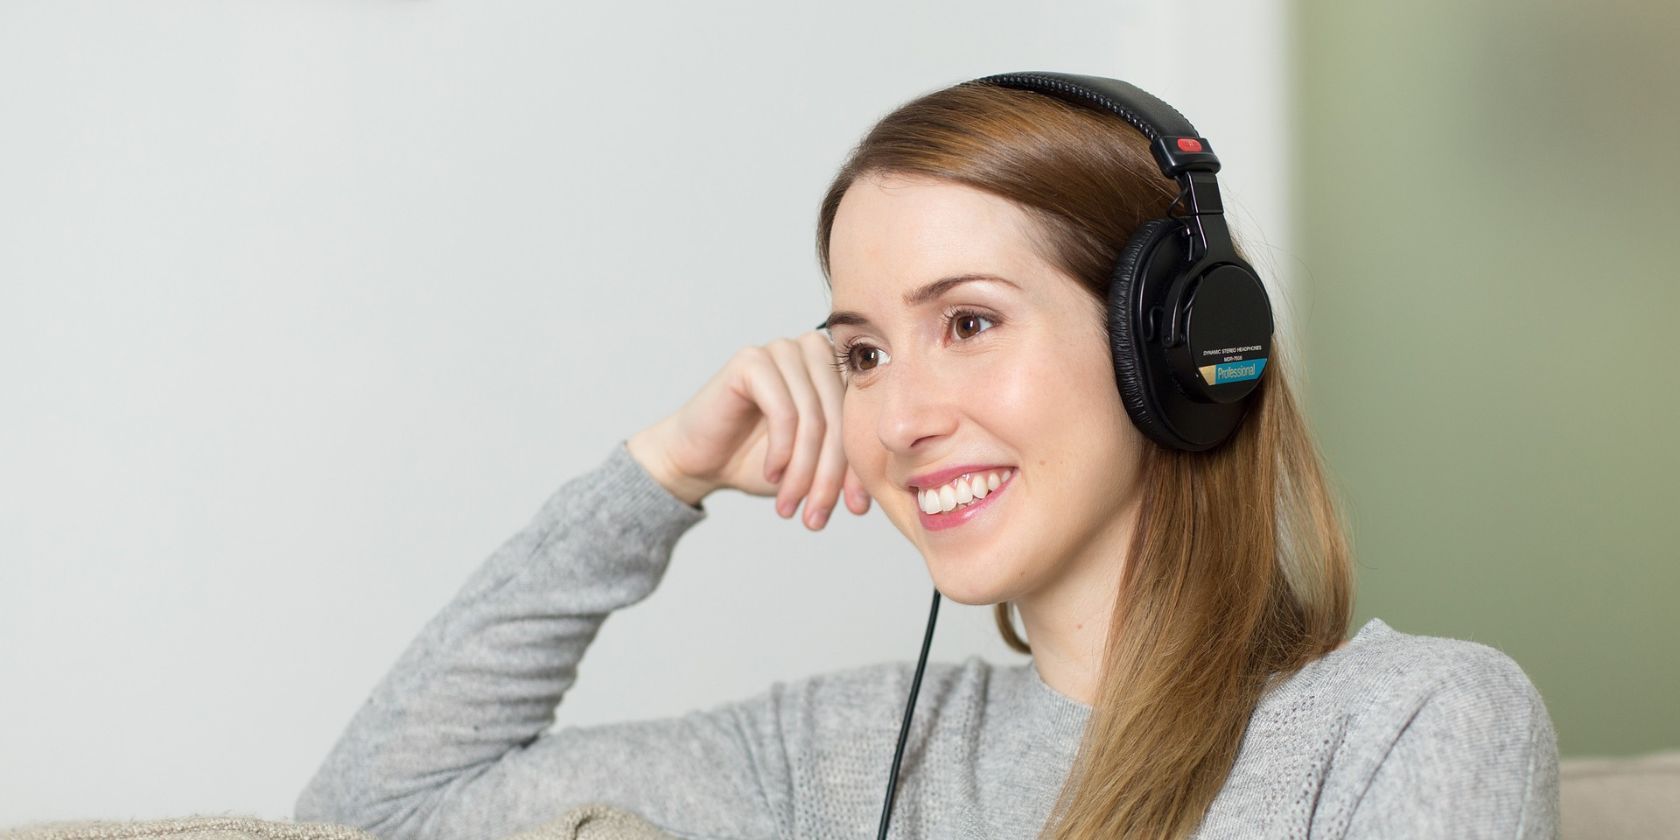 A woman sat down listening to music through her headphones